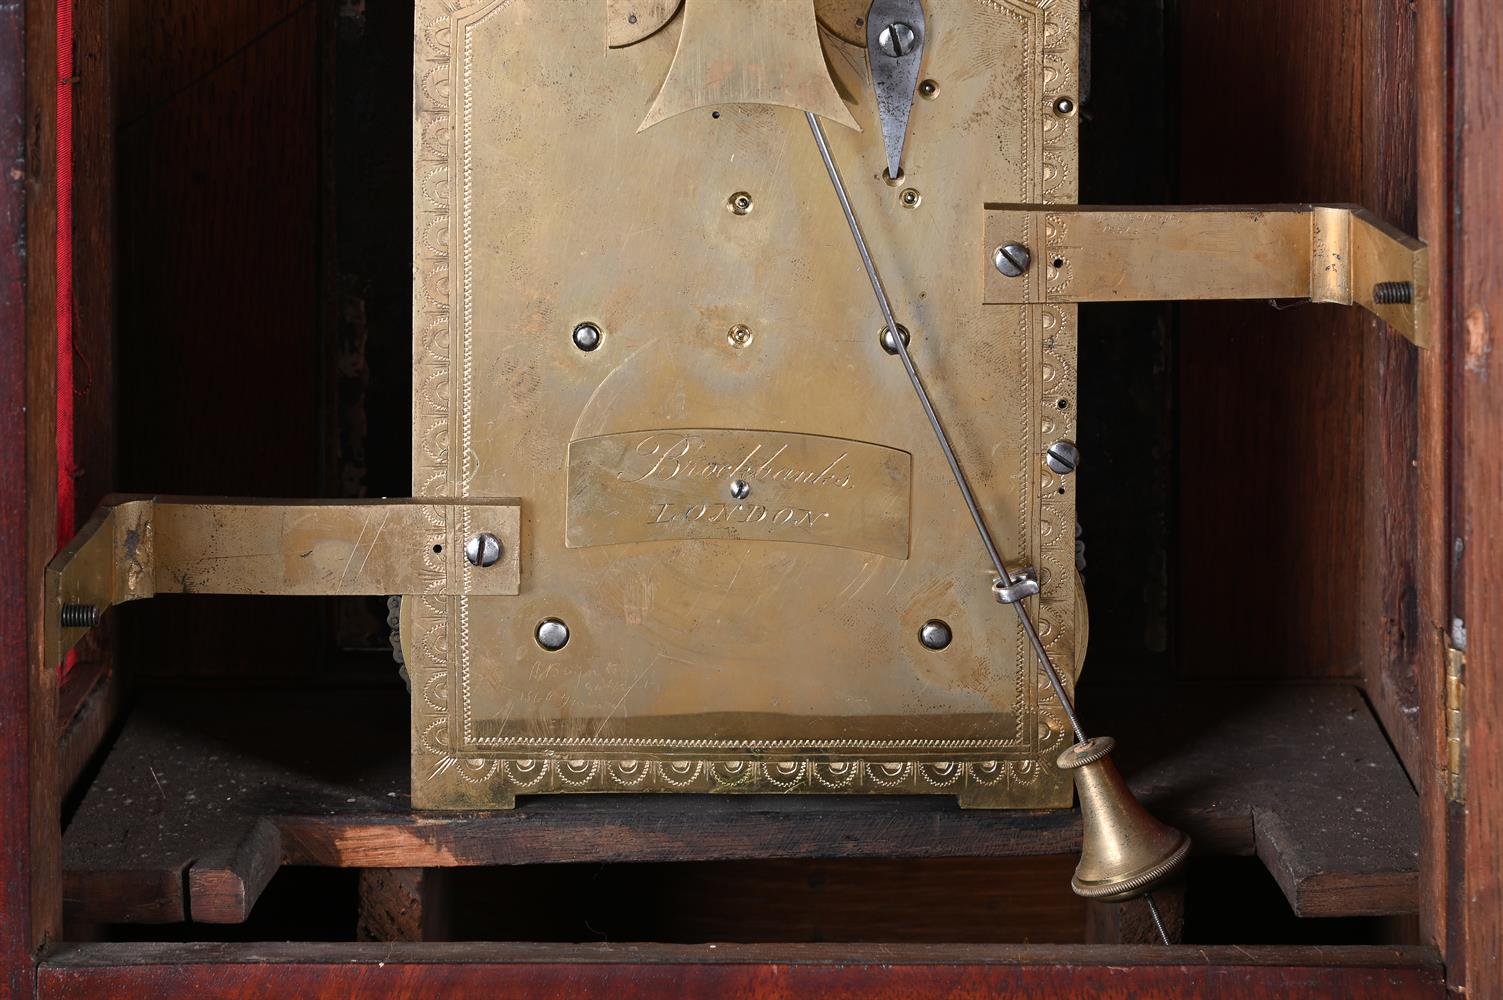 A GEORGE III BRASS MOUNTED MAHOGANY TABLE CLOCK WITH TRIP-HOUR REPEAT - Image 3 of 3